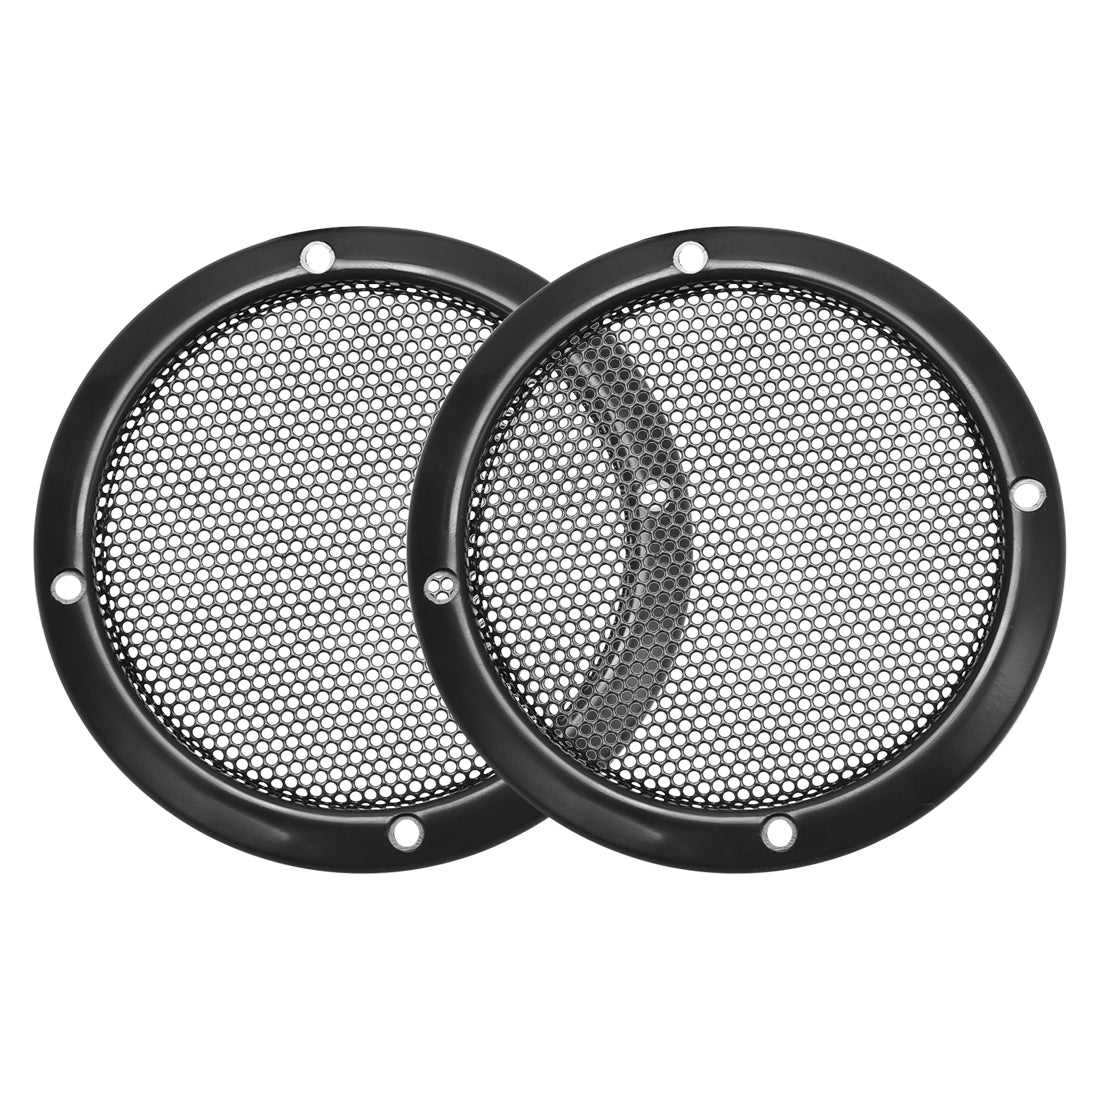 uxcell Uxcell Grill Cover 3 Inch 93mm Mesh Circle Subwoofer Guard Protector Black 2pcs